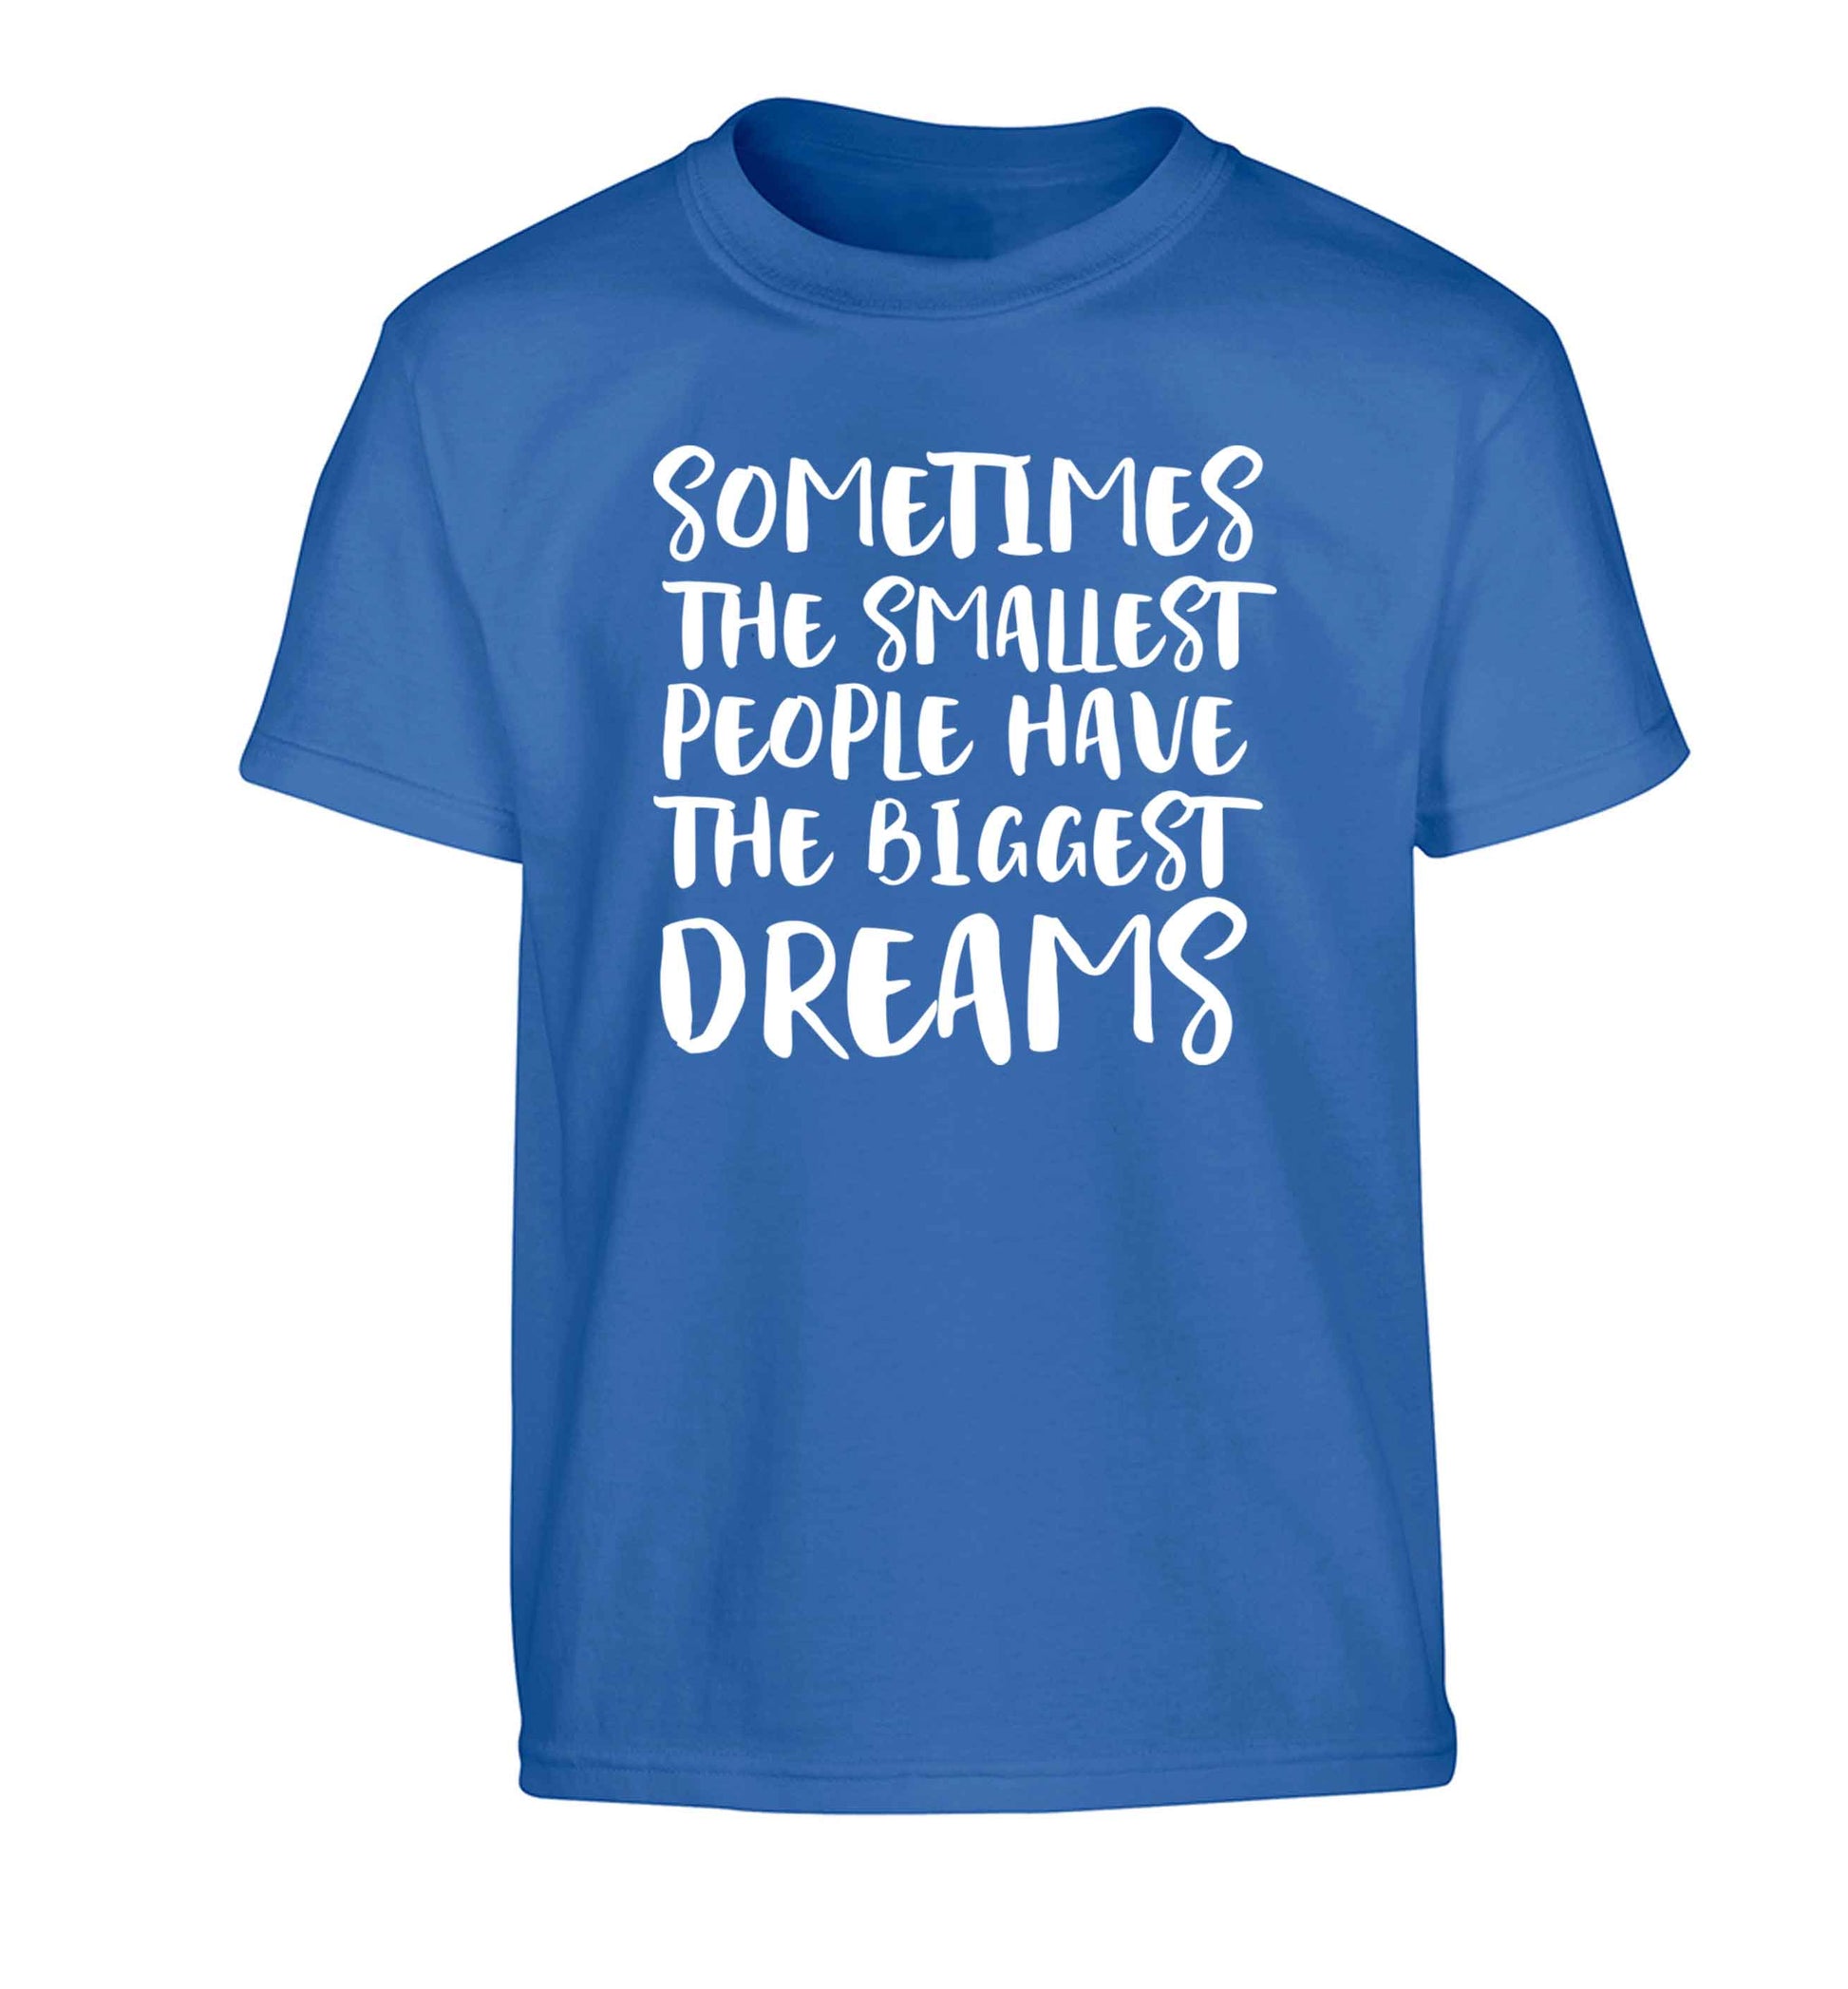 Sometimes the smallest people have the biggest dreams Children's blue Tshirt 12-13 Years